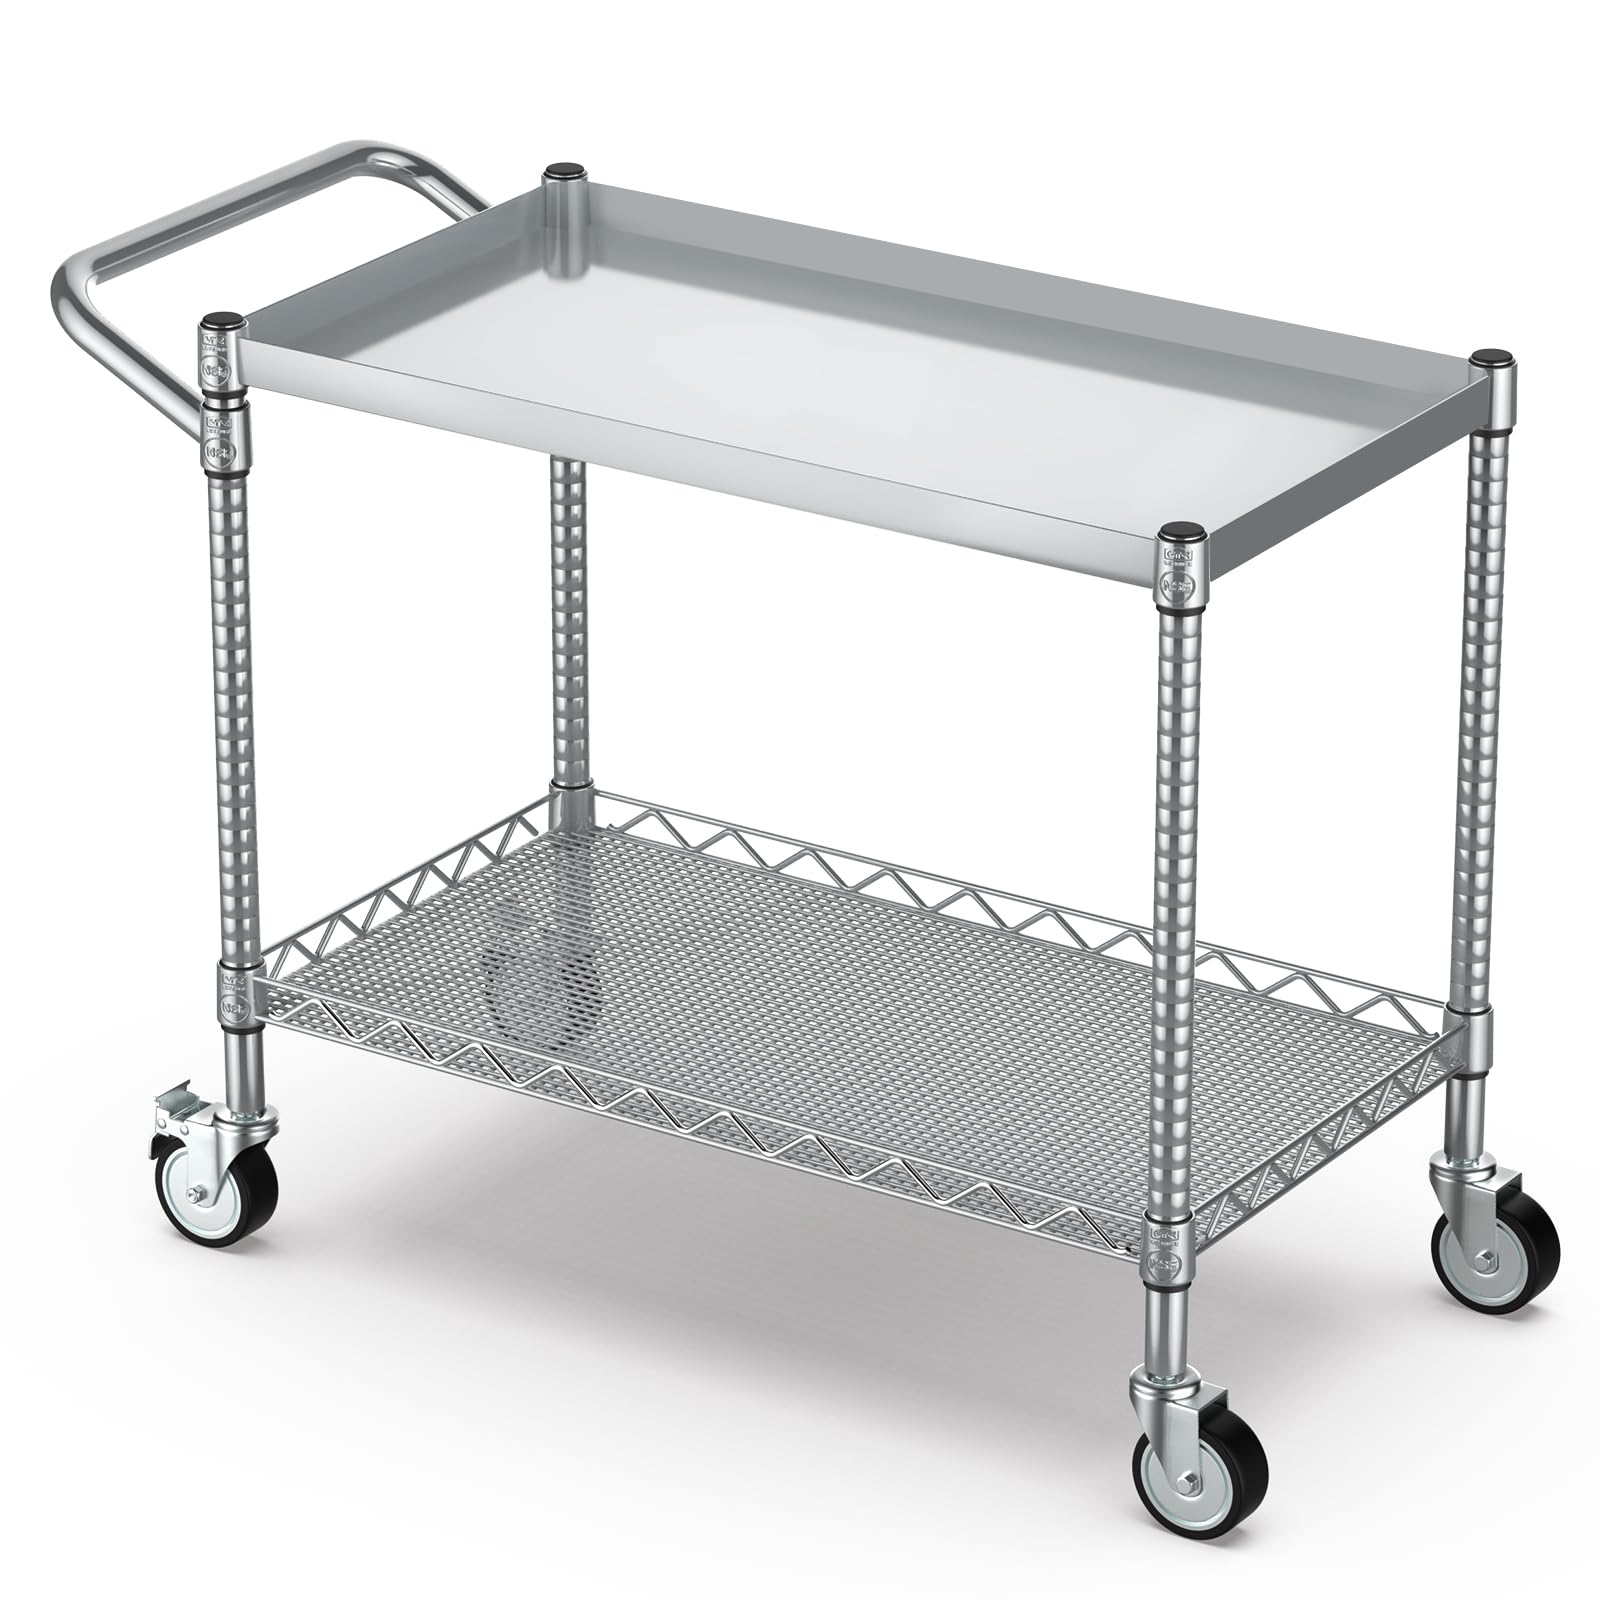 Leteuke 2 Tier Utility Cart with Wheels, NSF Certified 900LBS Capacity Heavy Duty Rolling Utility Carts with Handle Bar, Commercial Grade Metal Serving Storage Cart for Warehouse Garage Kitchen,Silver